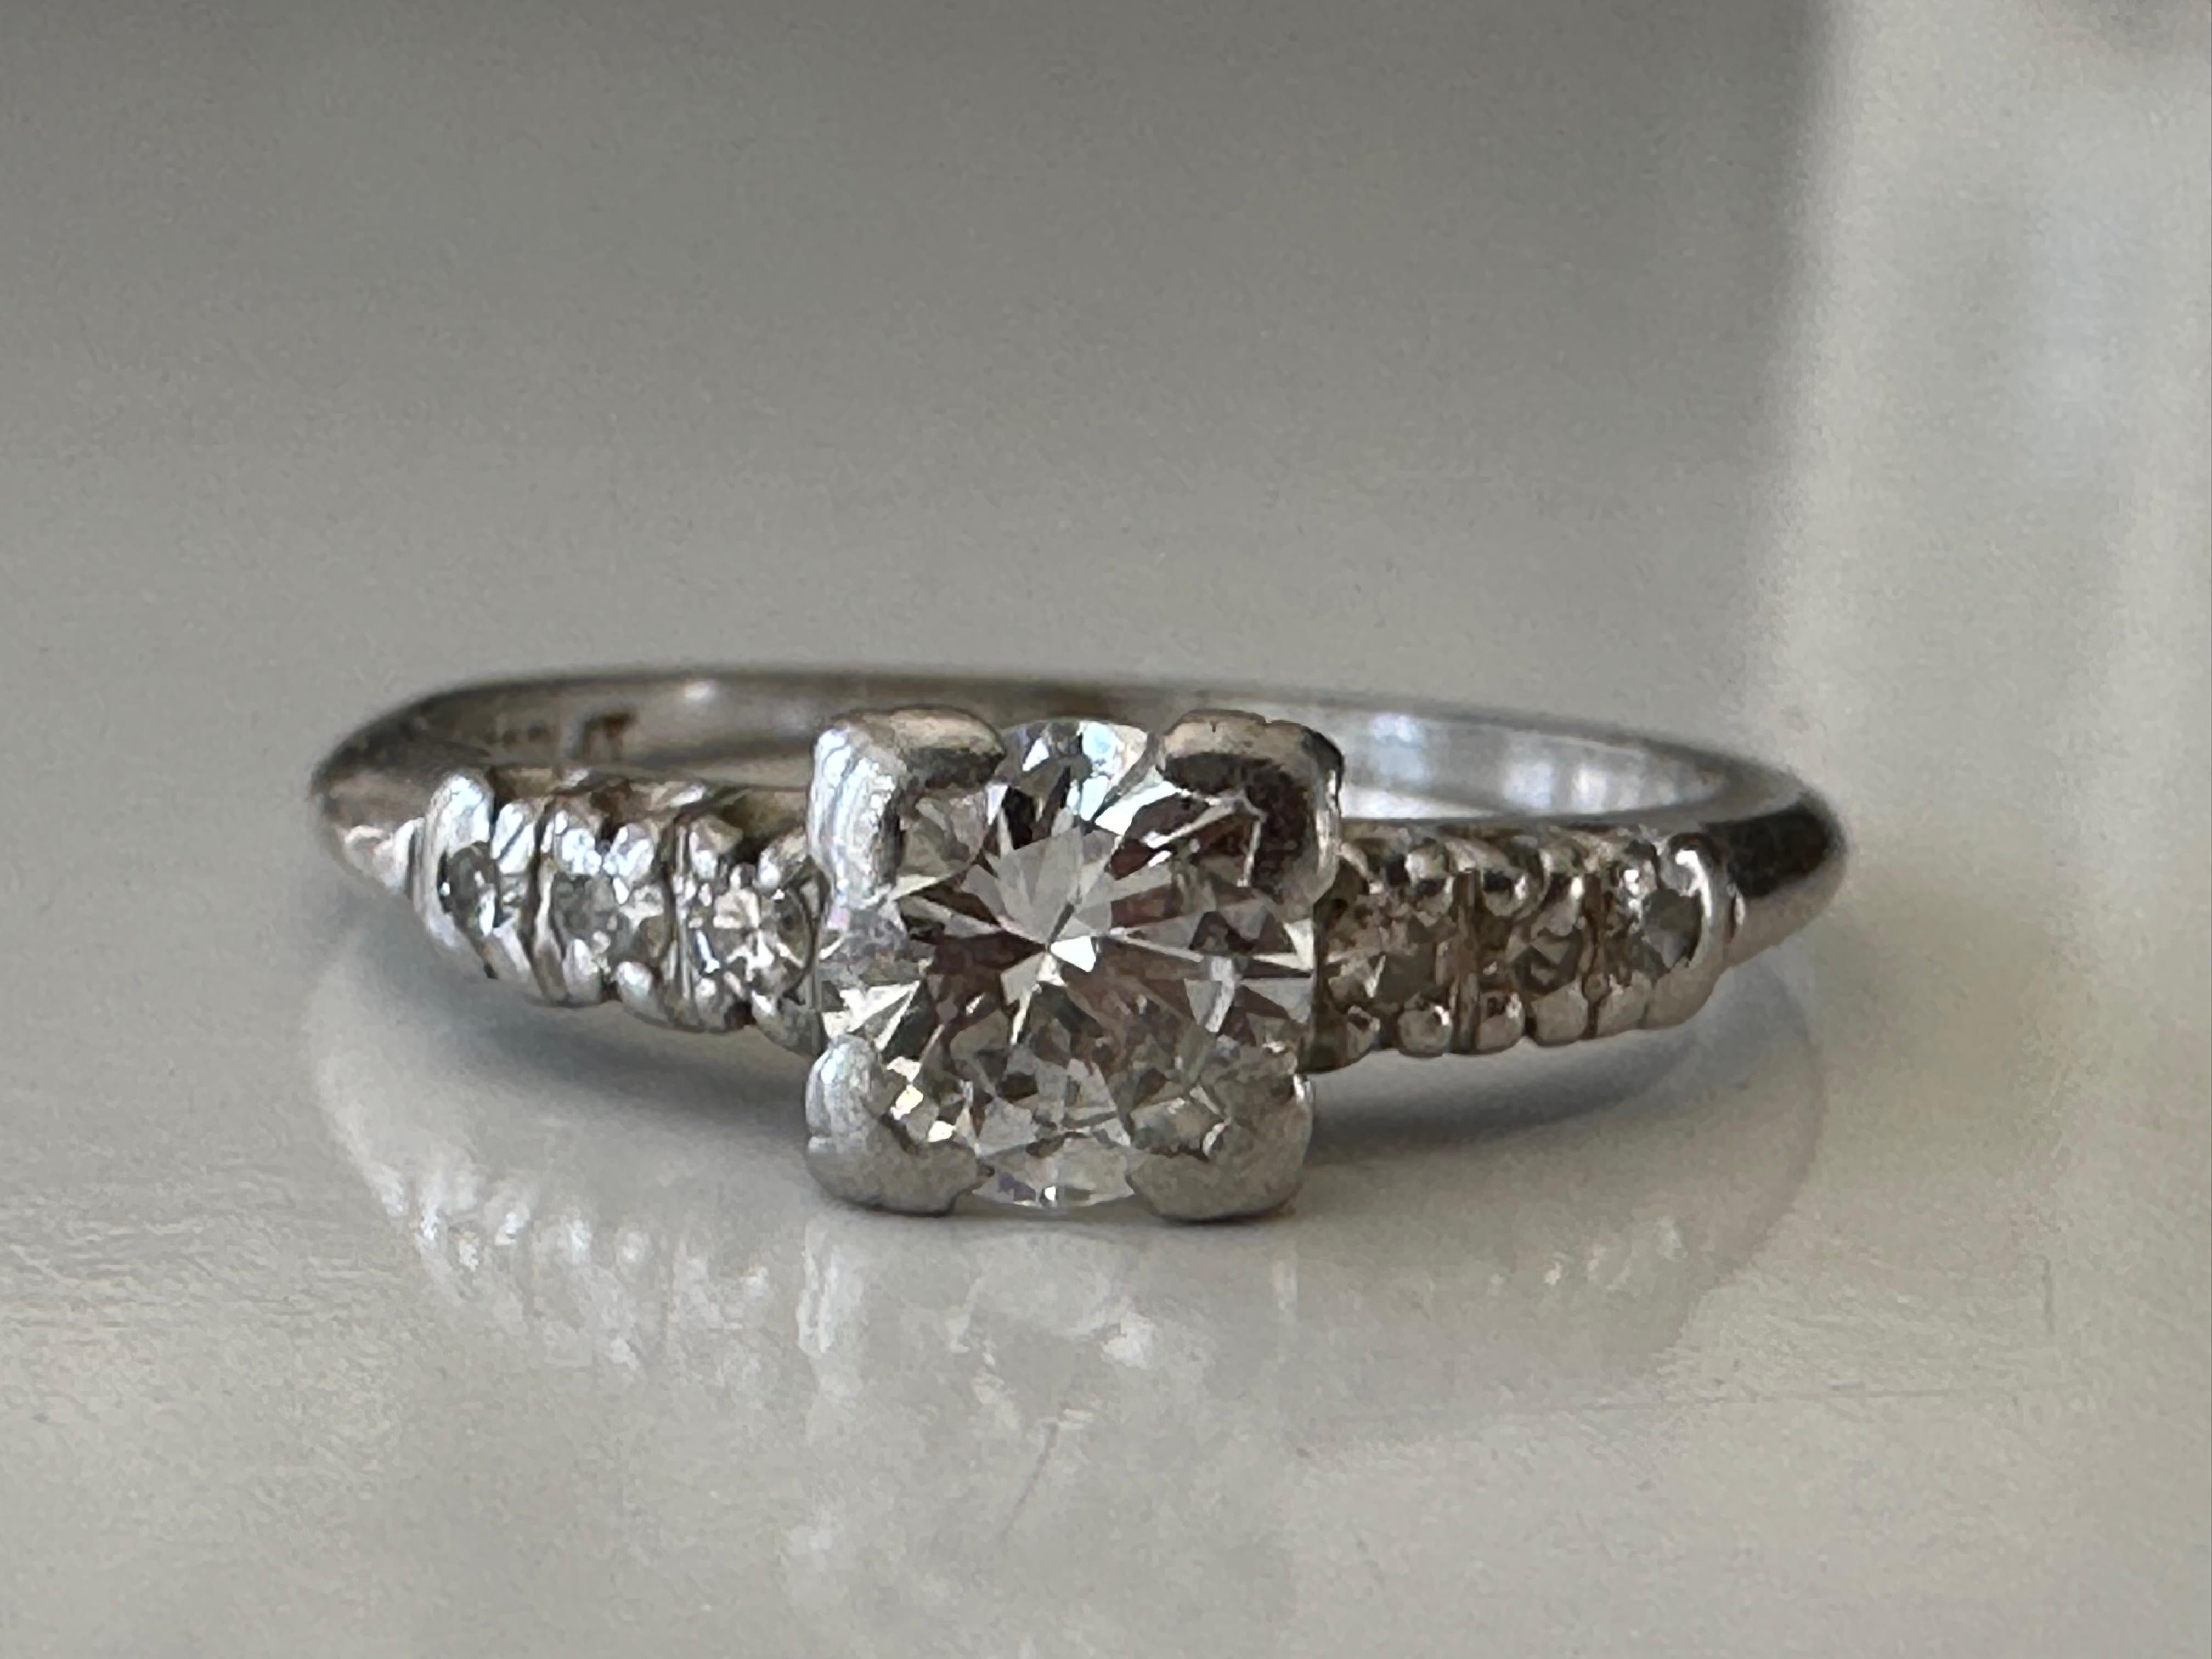 Handcrafted in the 1940s in platinum, this stunning Mid-century ring is designed around an Old European cut diamond center stone measuring approximately 0.50 carats, H color, SI1 clarity, and flanked by six single cut diamonds, three on each side,